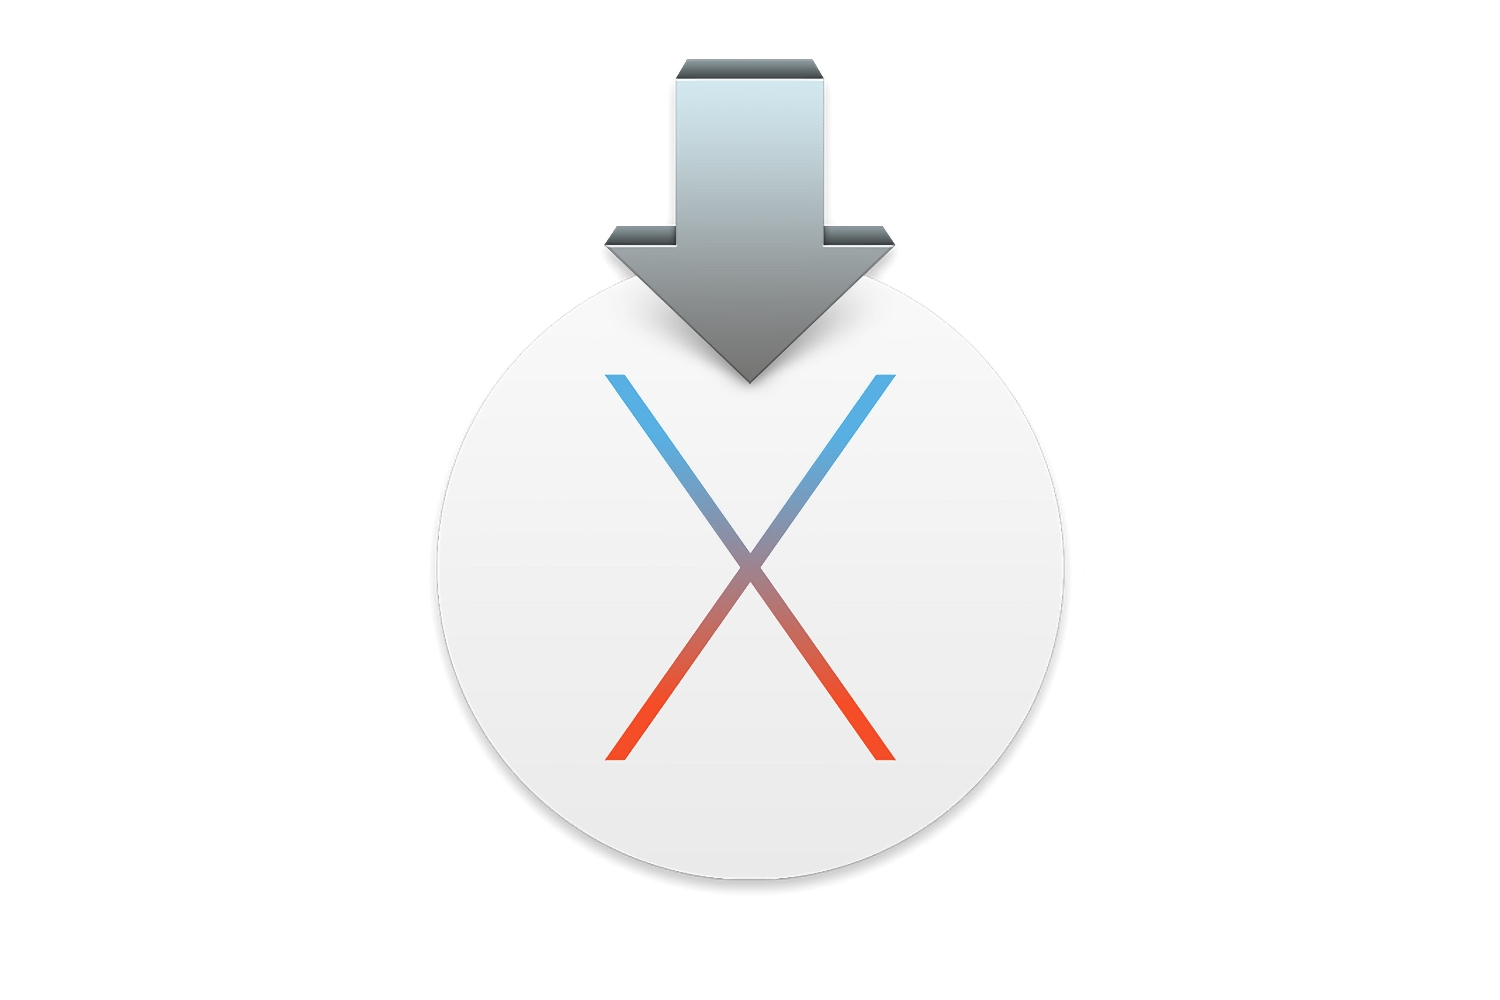 download os x 10.11 for usb recovery without app store